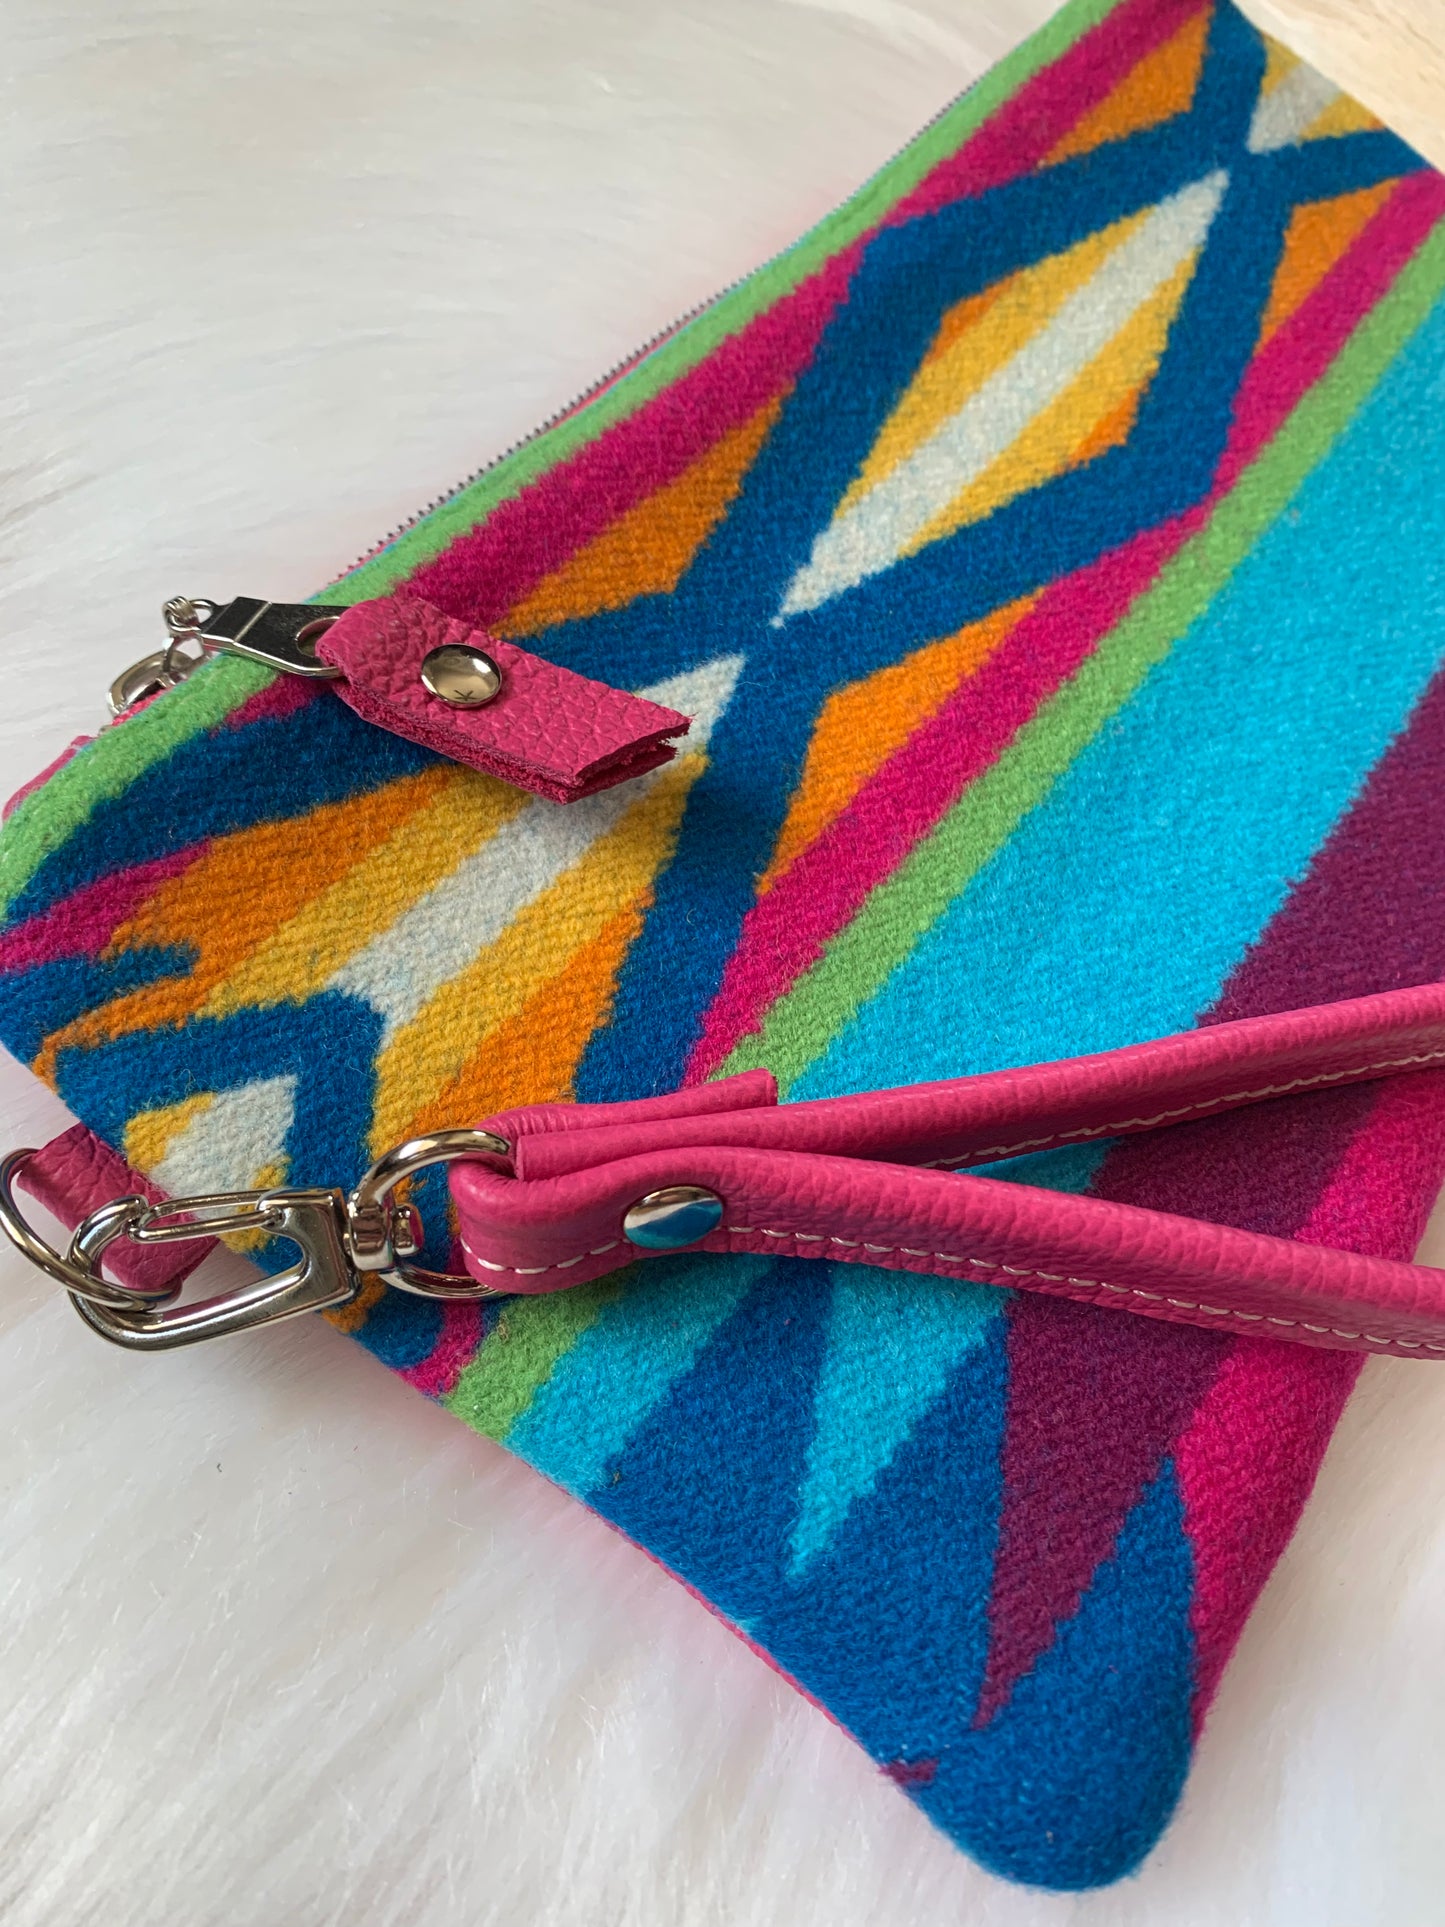 Wool and leather clutch wristlet, San Gabriel wool, hot pink leather clutch wallet